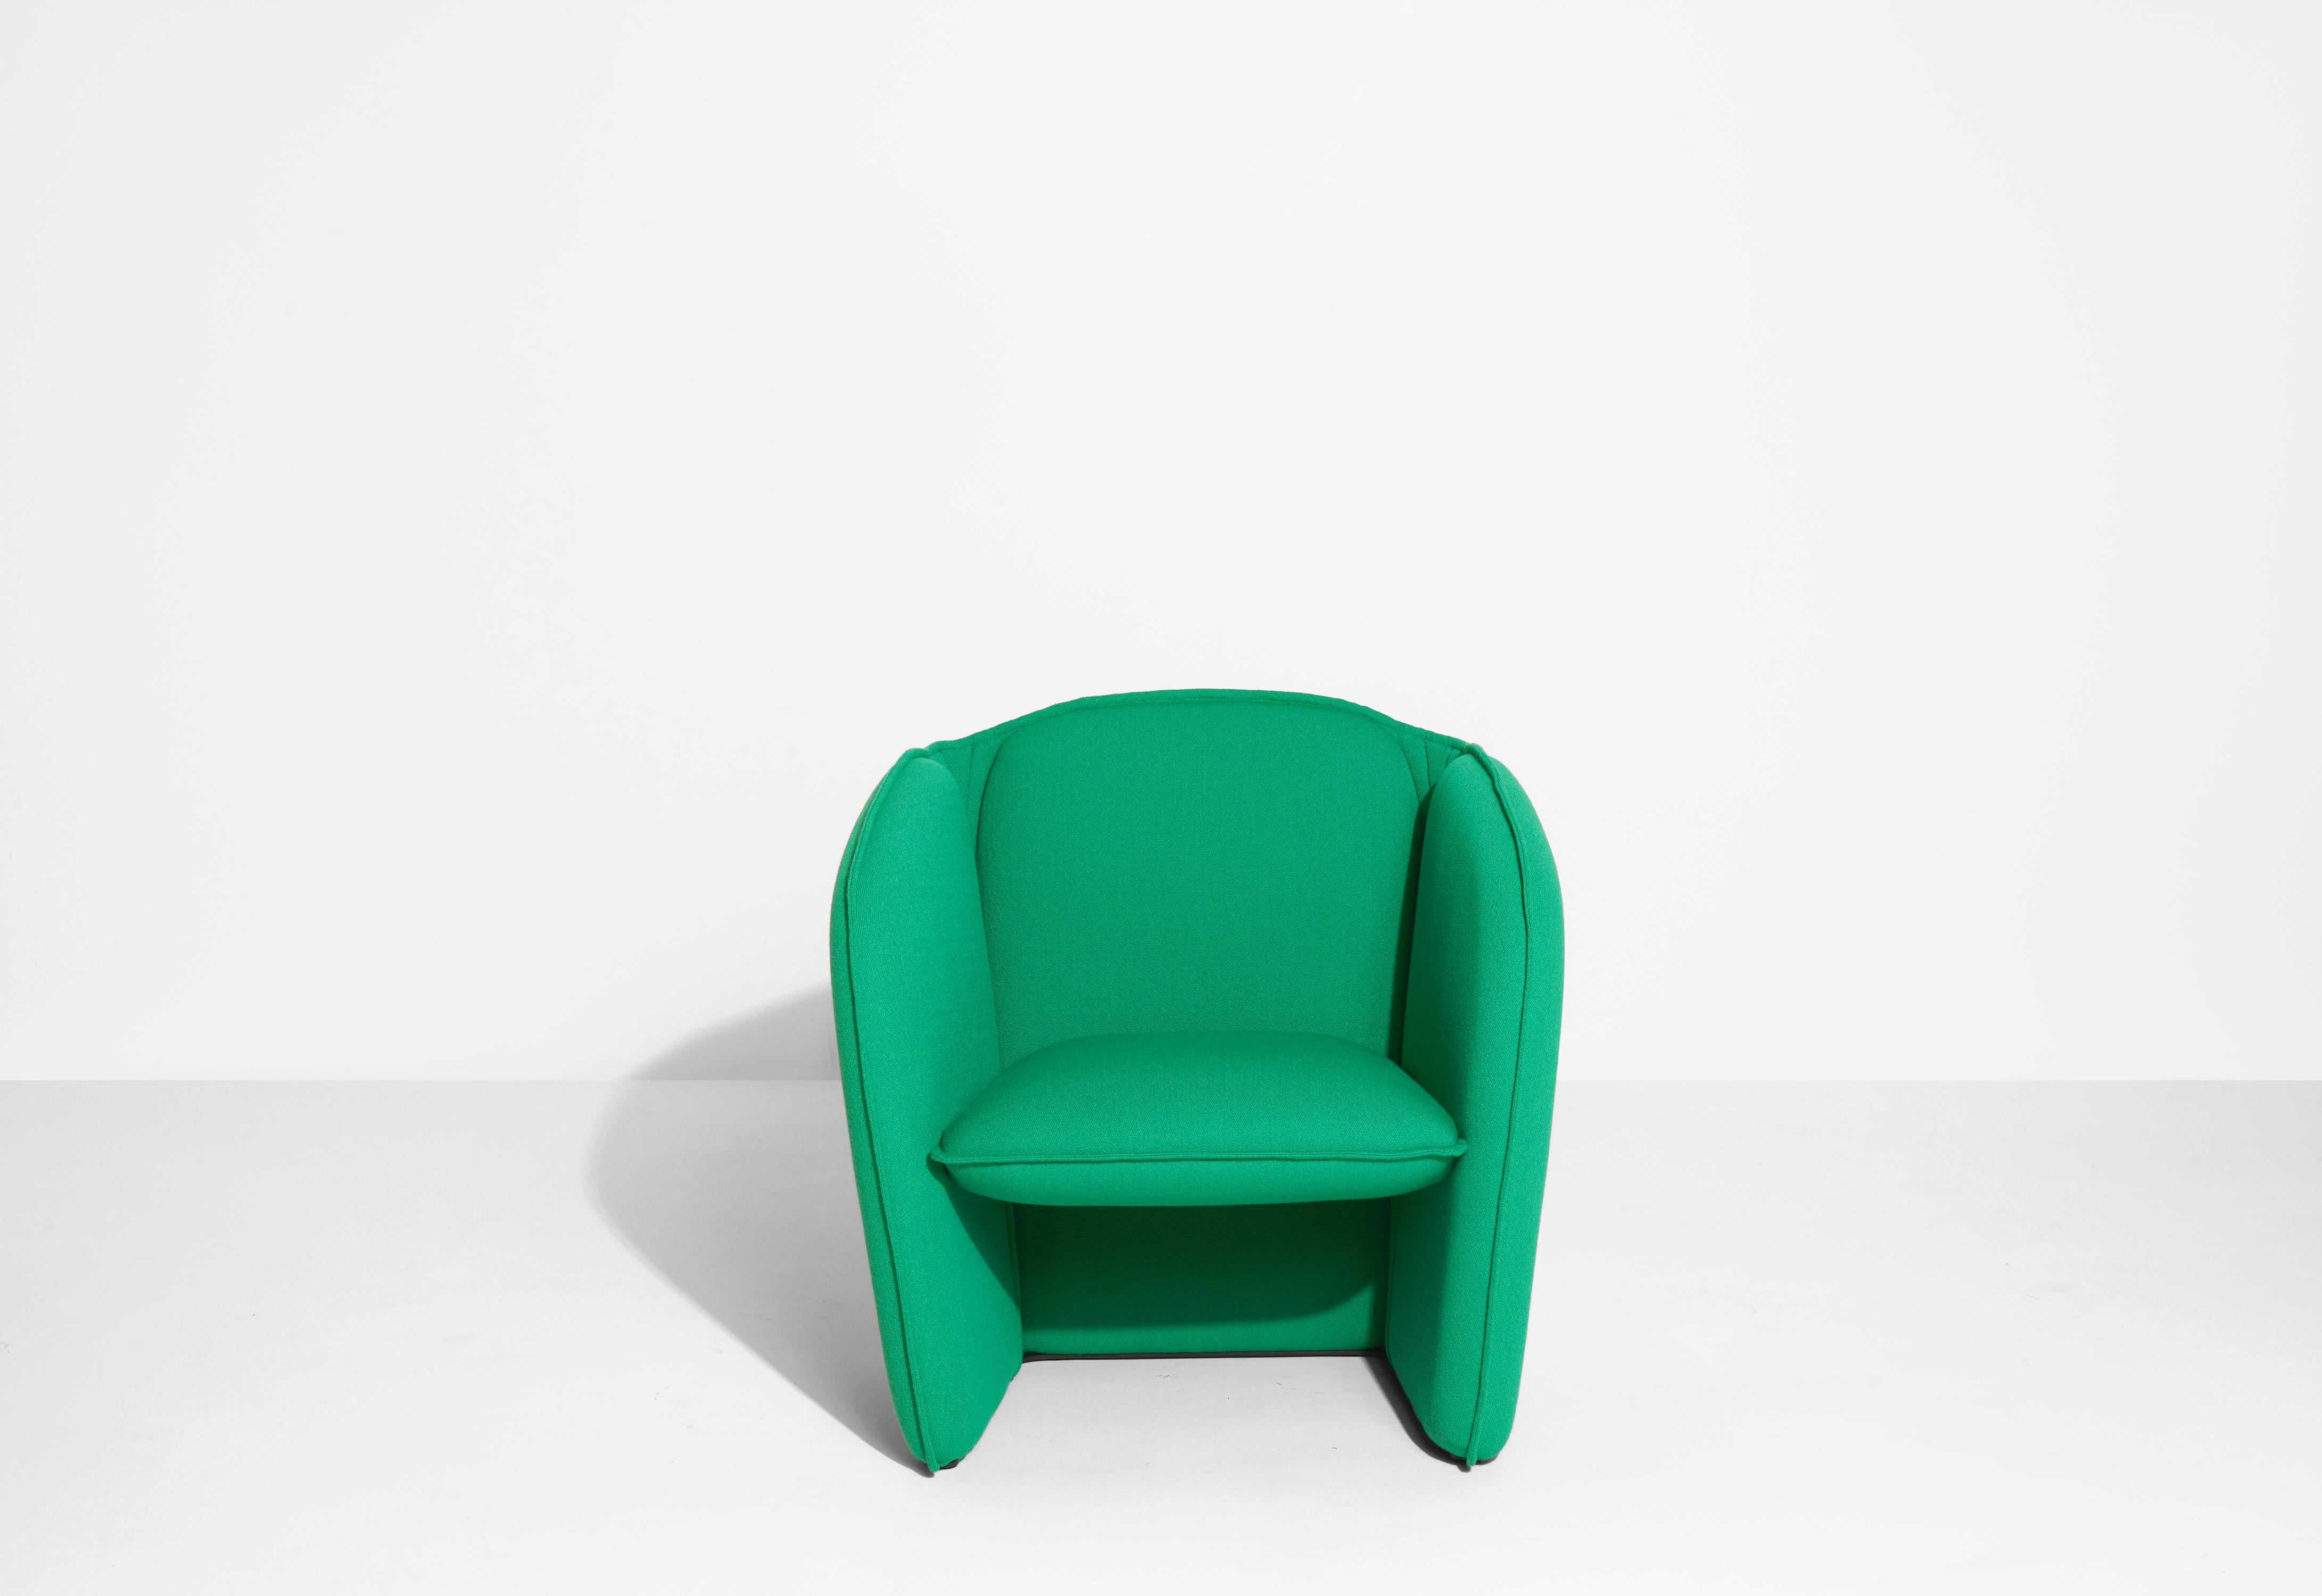 Contemporary Petite Friture Lily Armchair in Mint Green by Färg & Blanche, 2022 For Sale